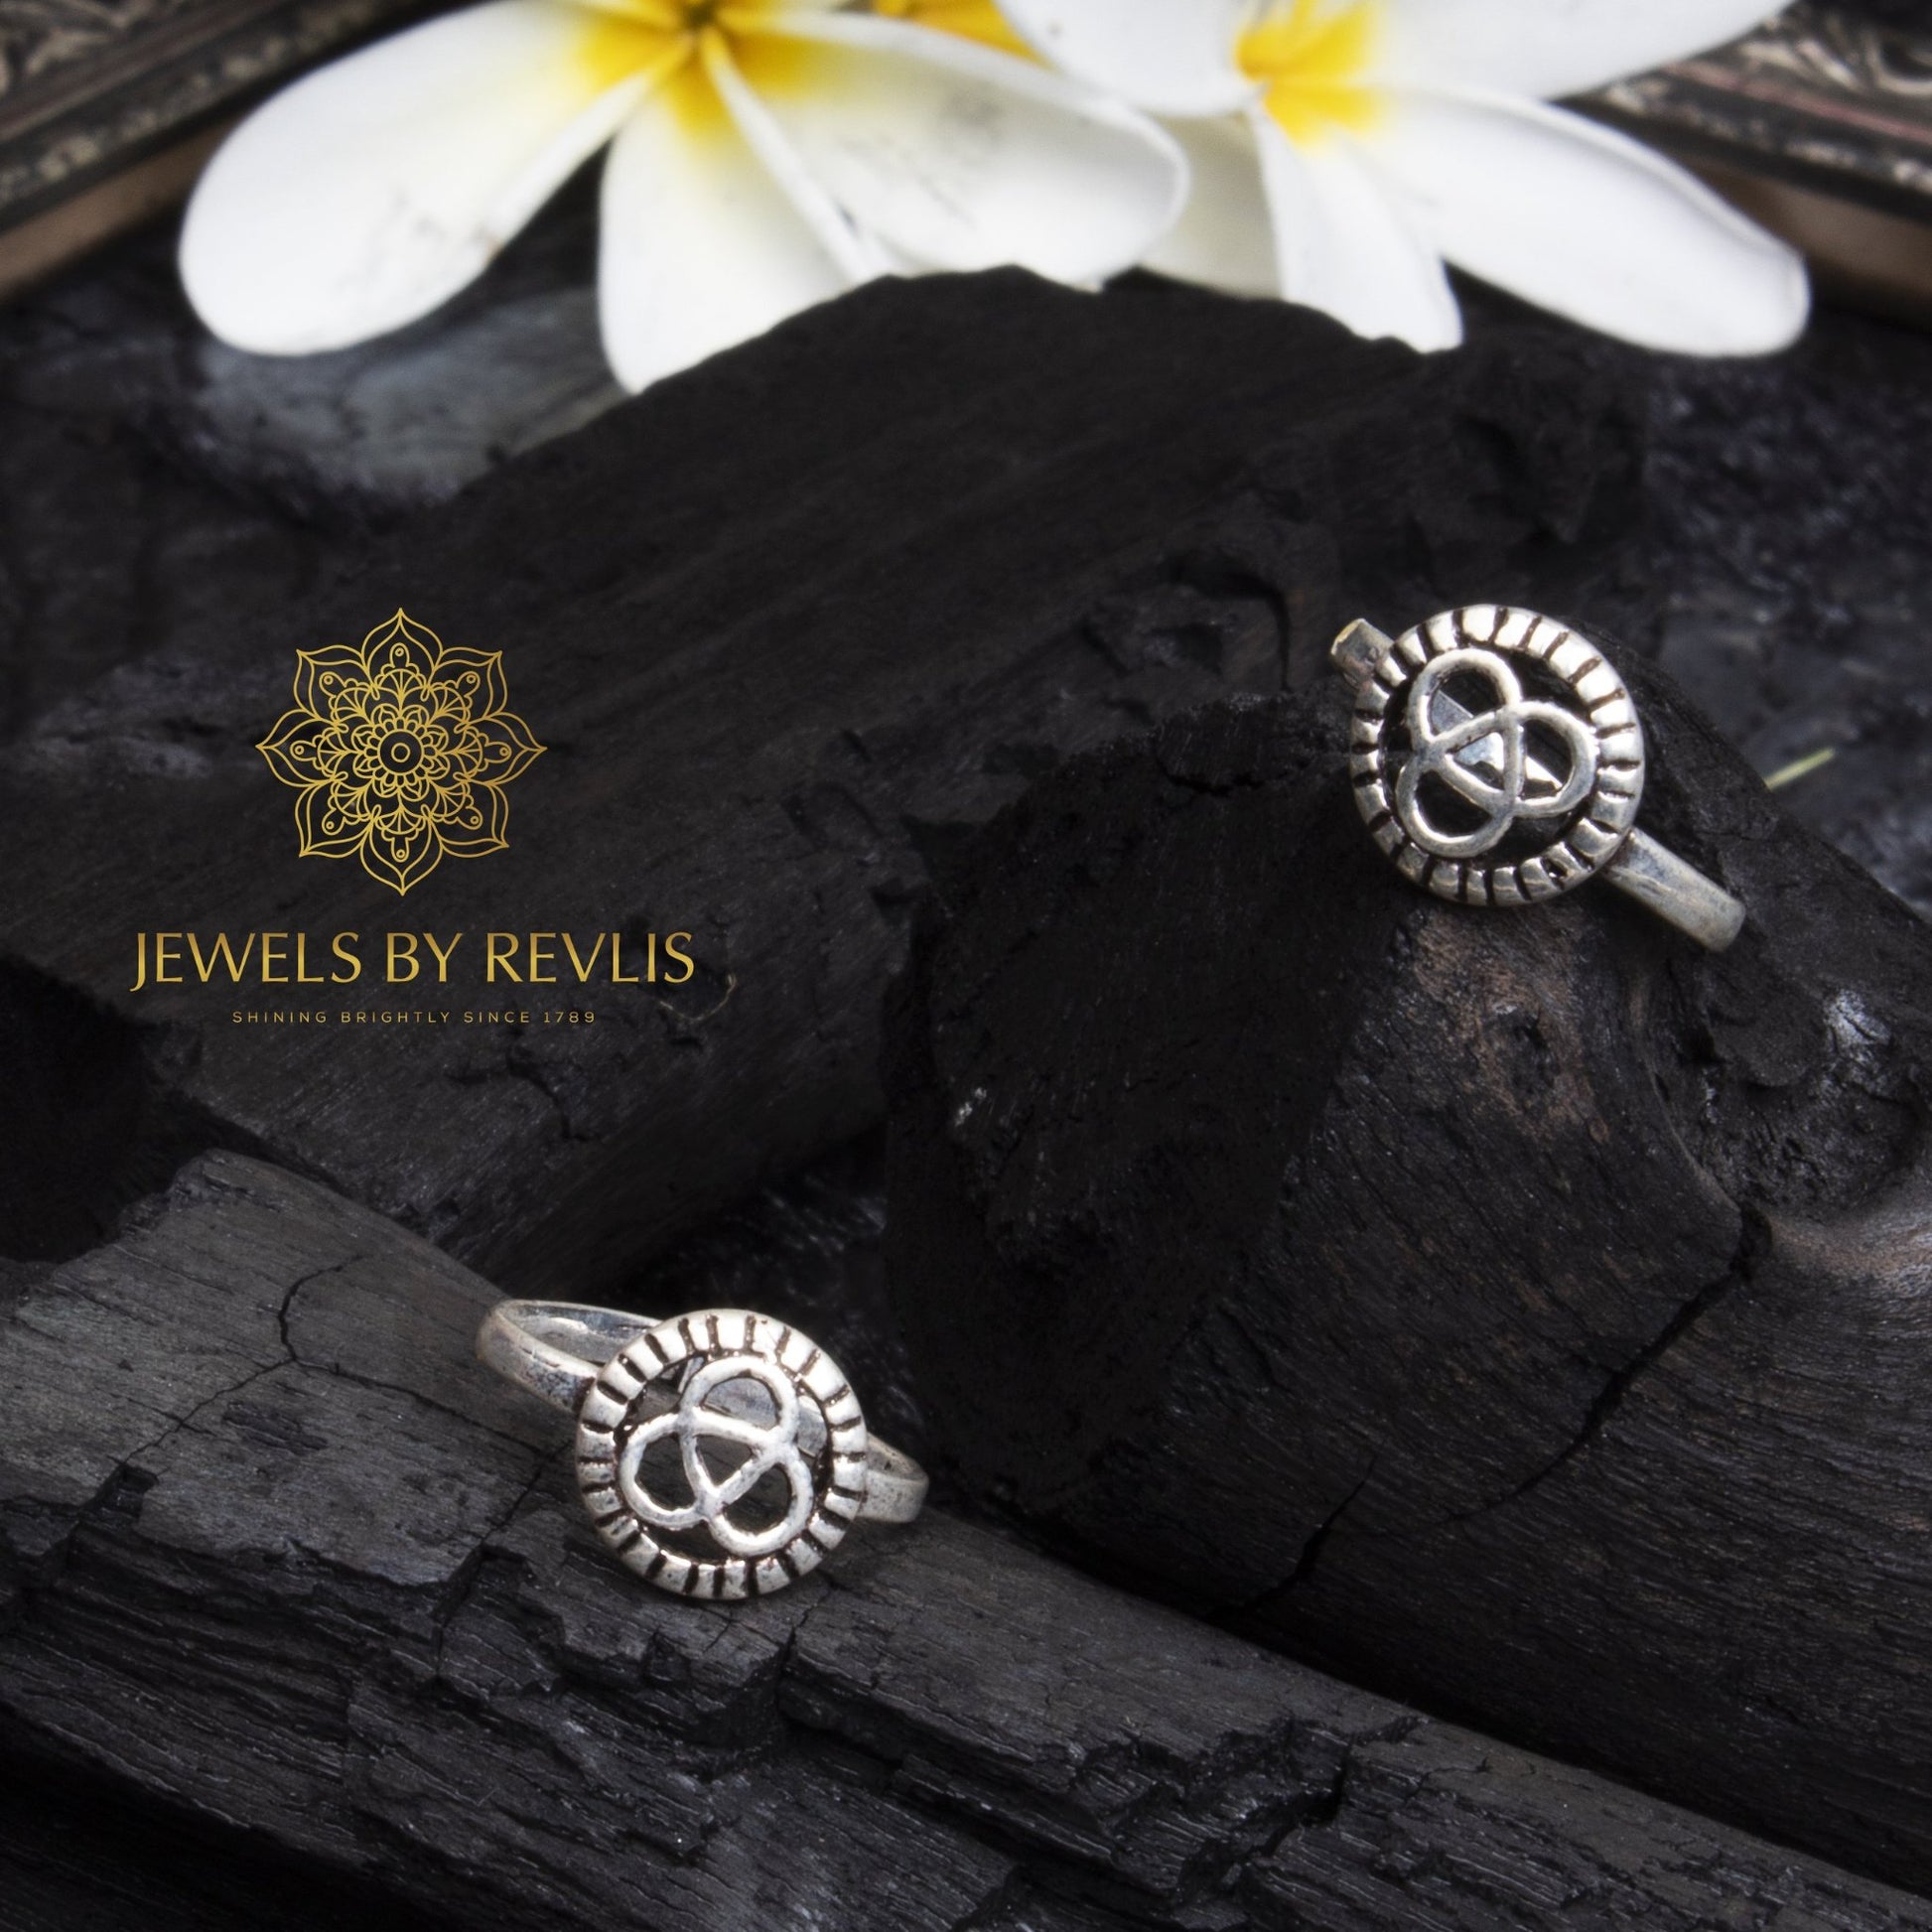 Jewels by Revlis Silver Toe Rings